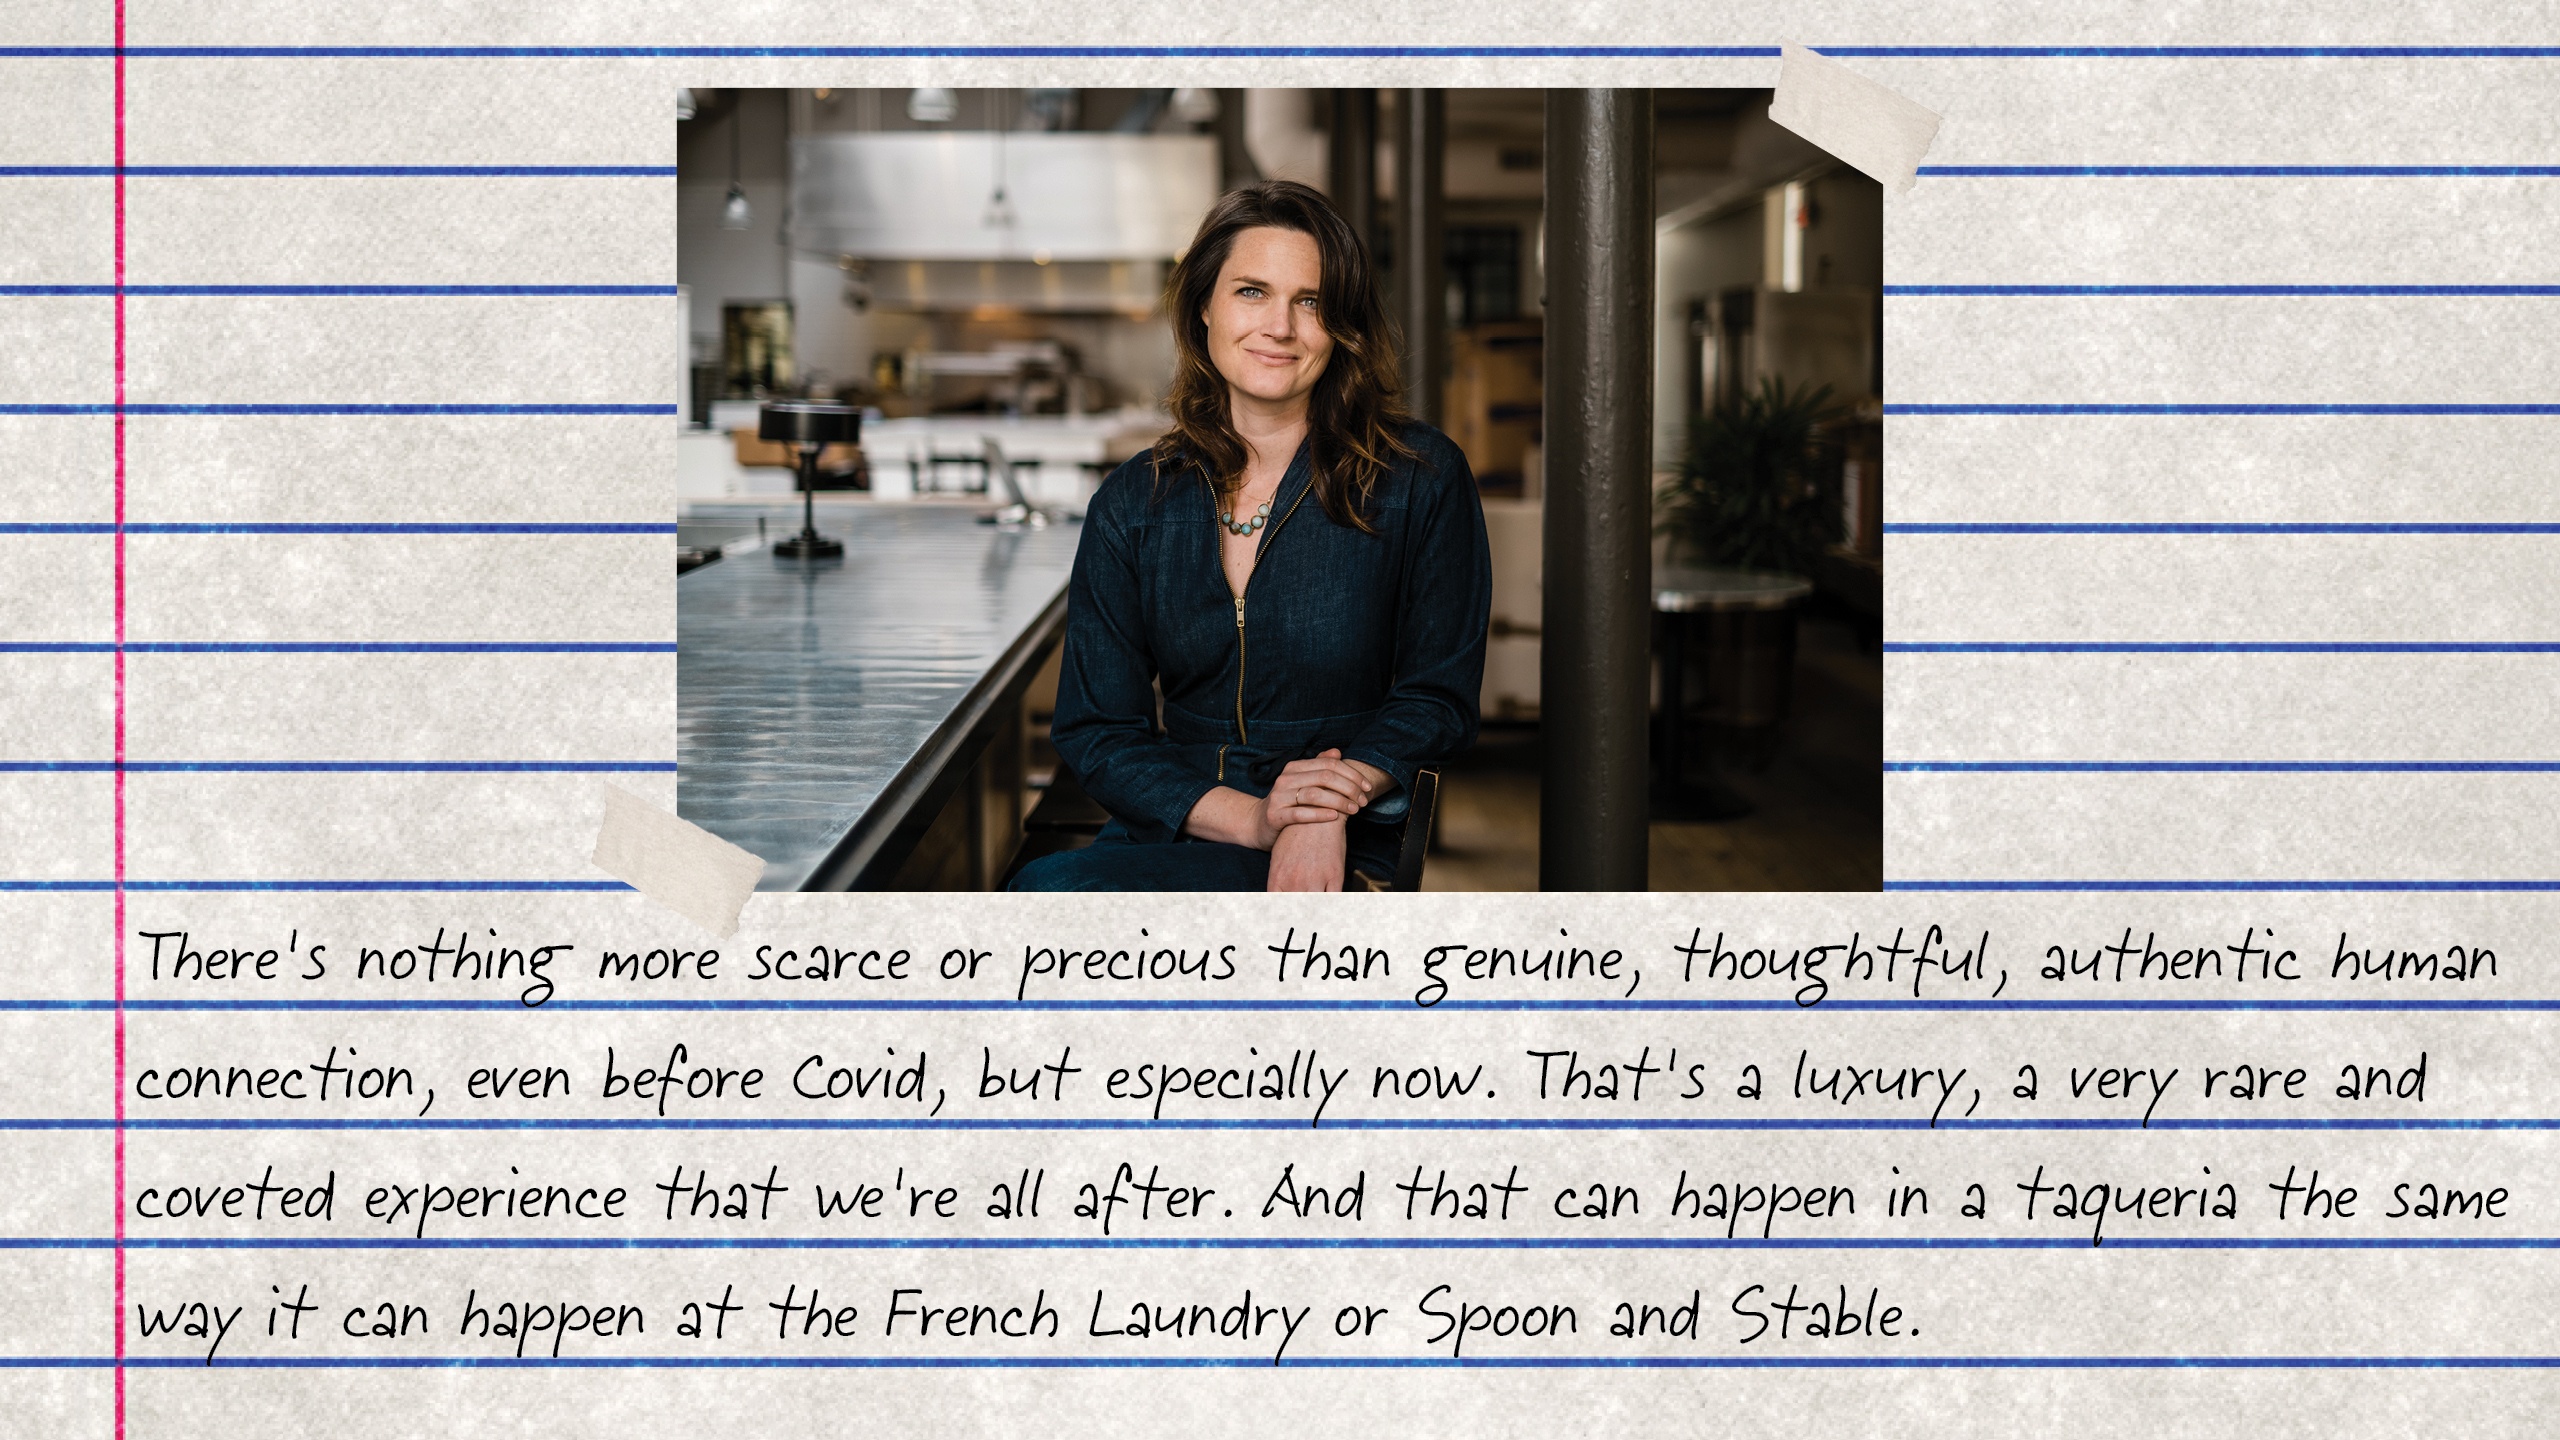 Alison Arth pull quote Spoon and Stable May 2020